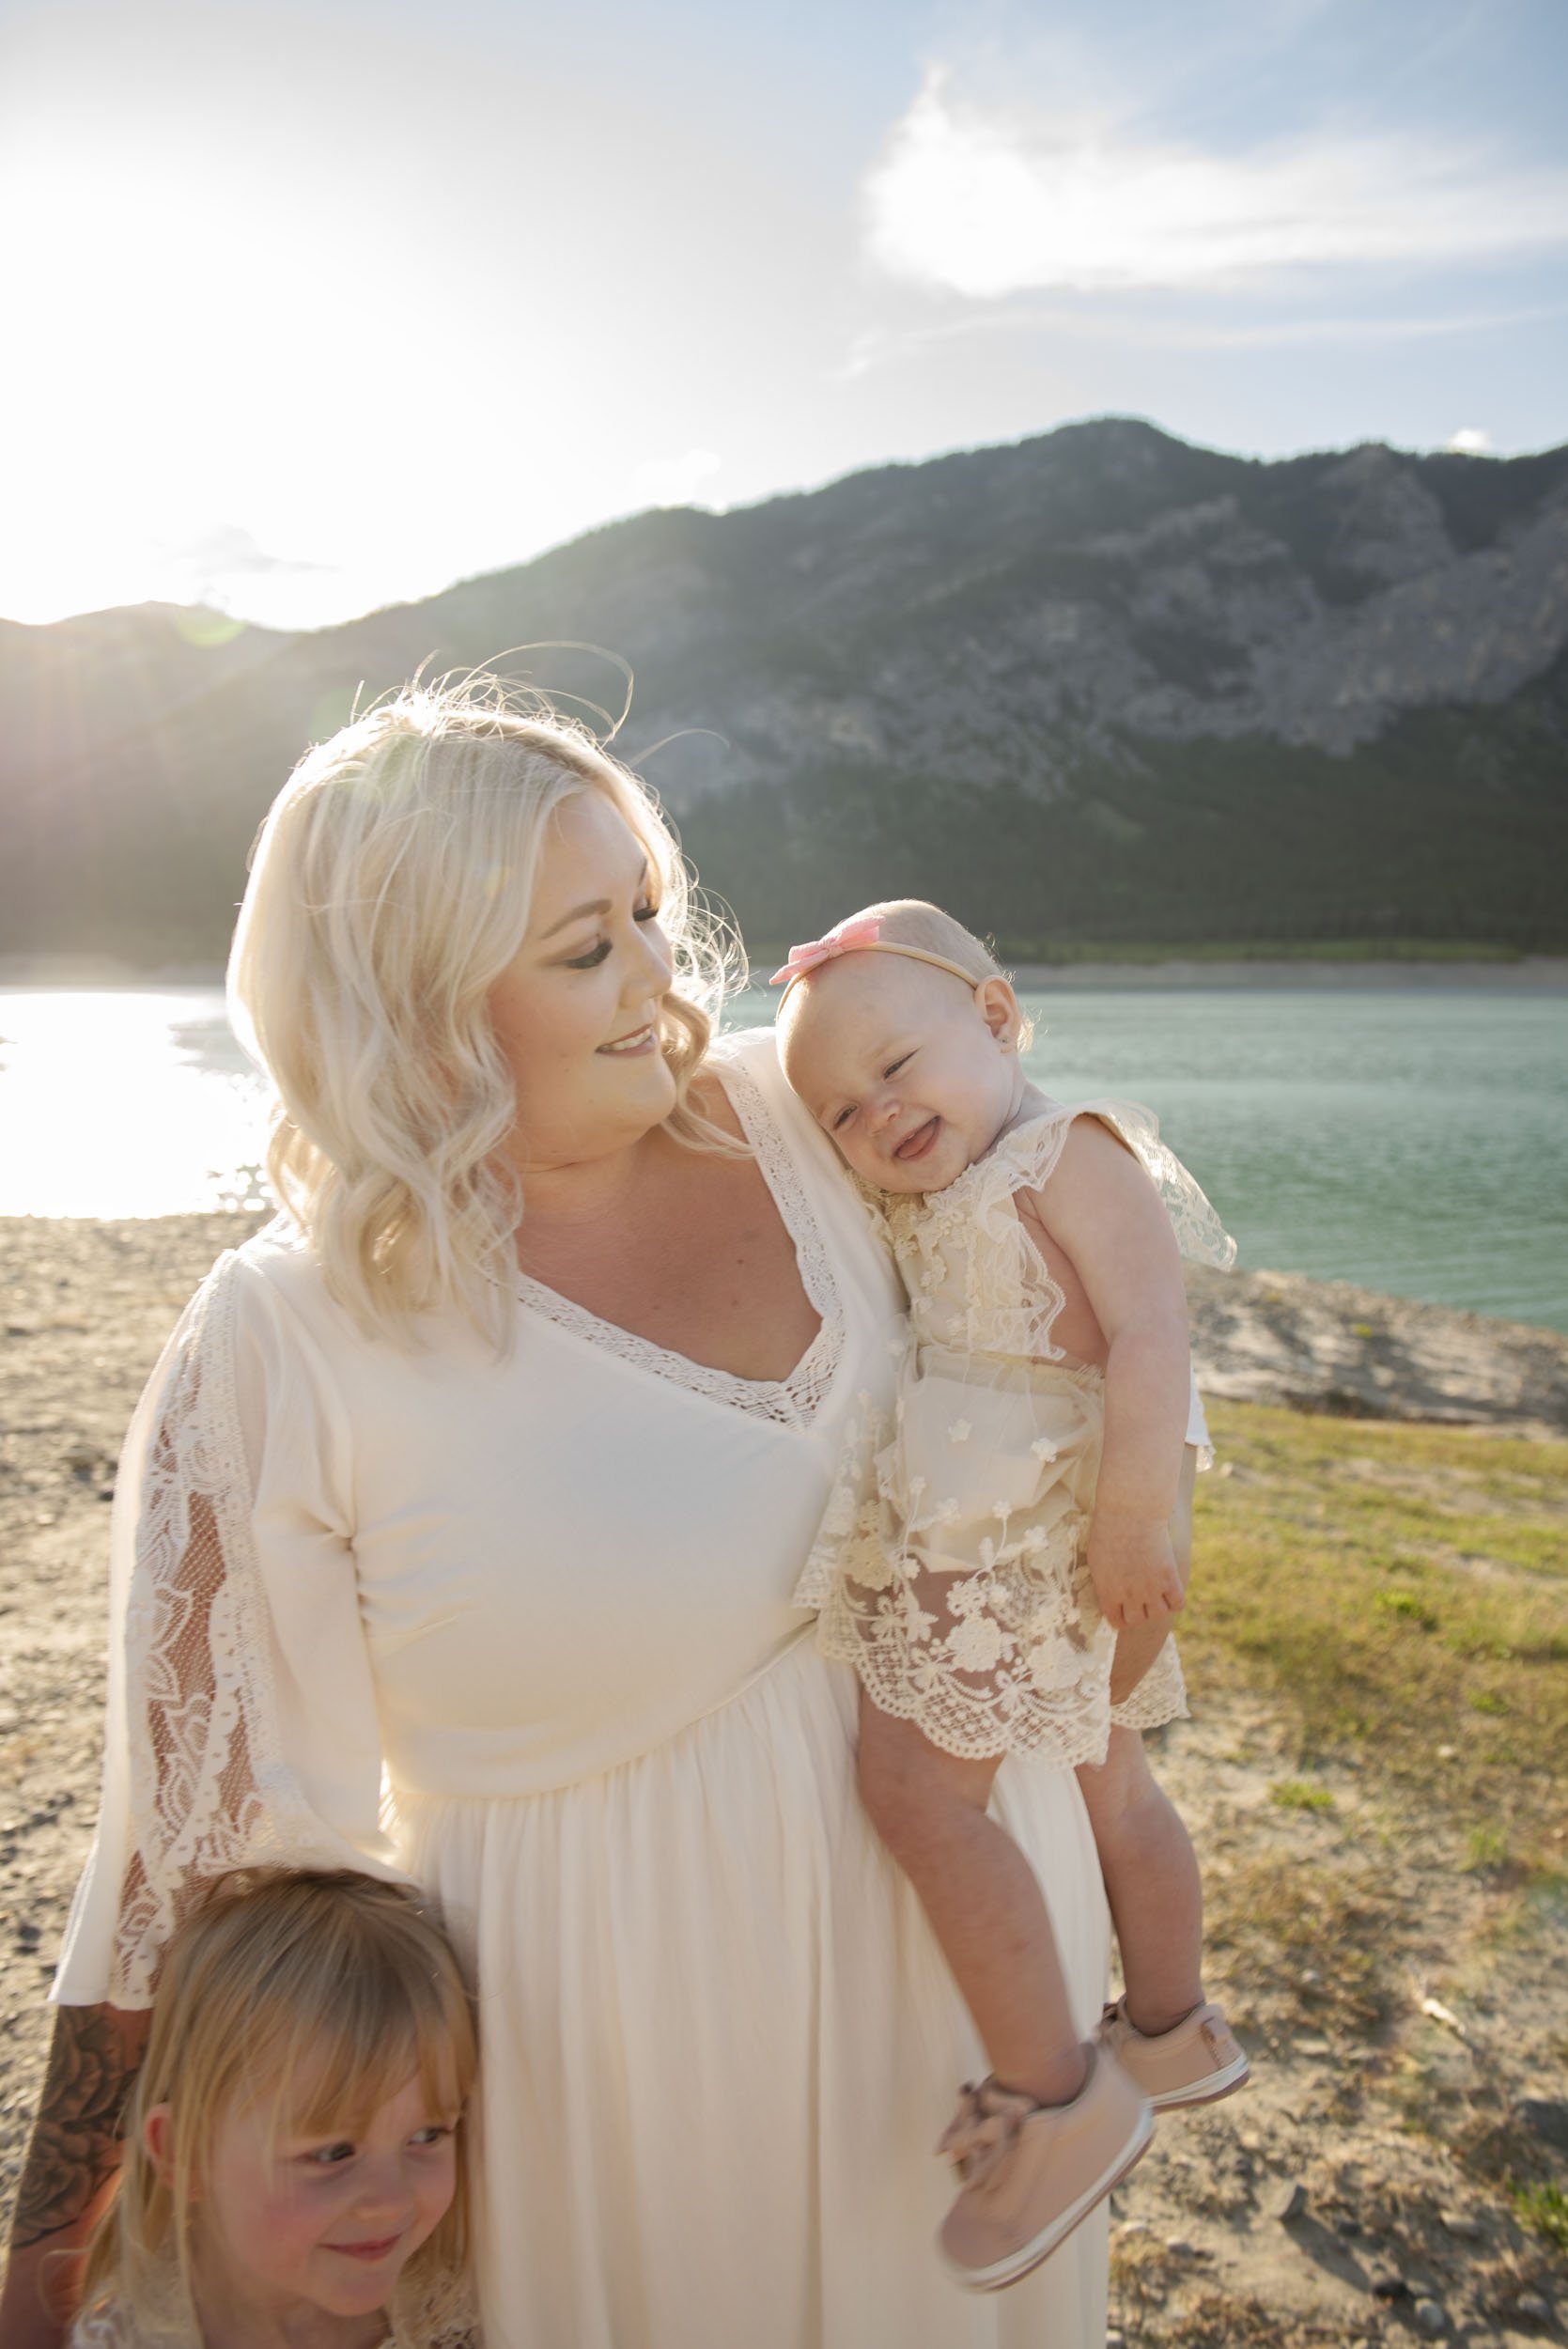 Lace and locket photo Airdrie Calgary Family Photographer-16.jpg